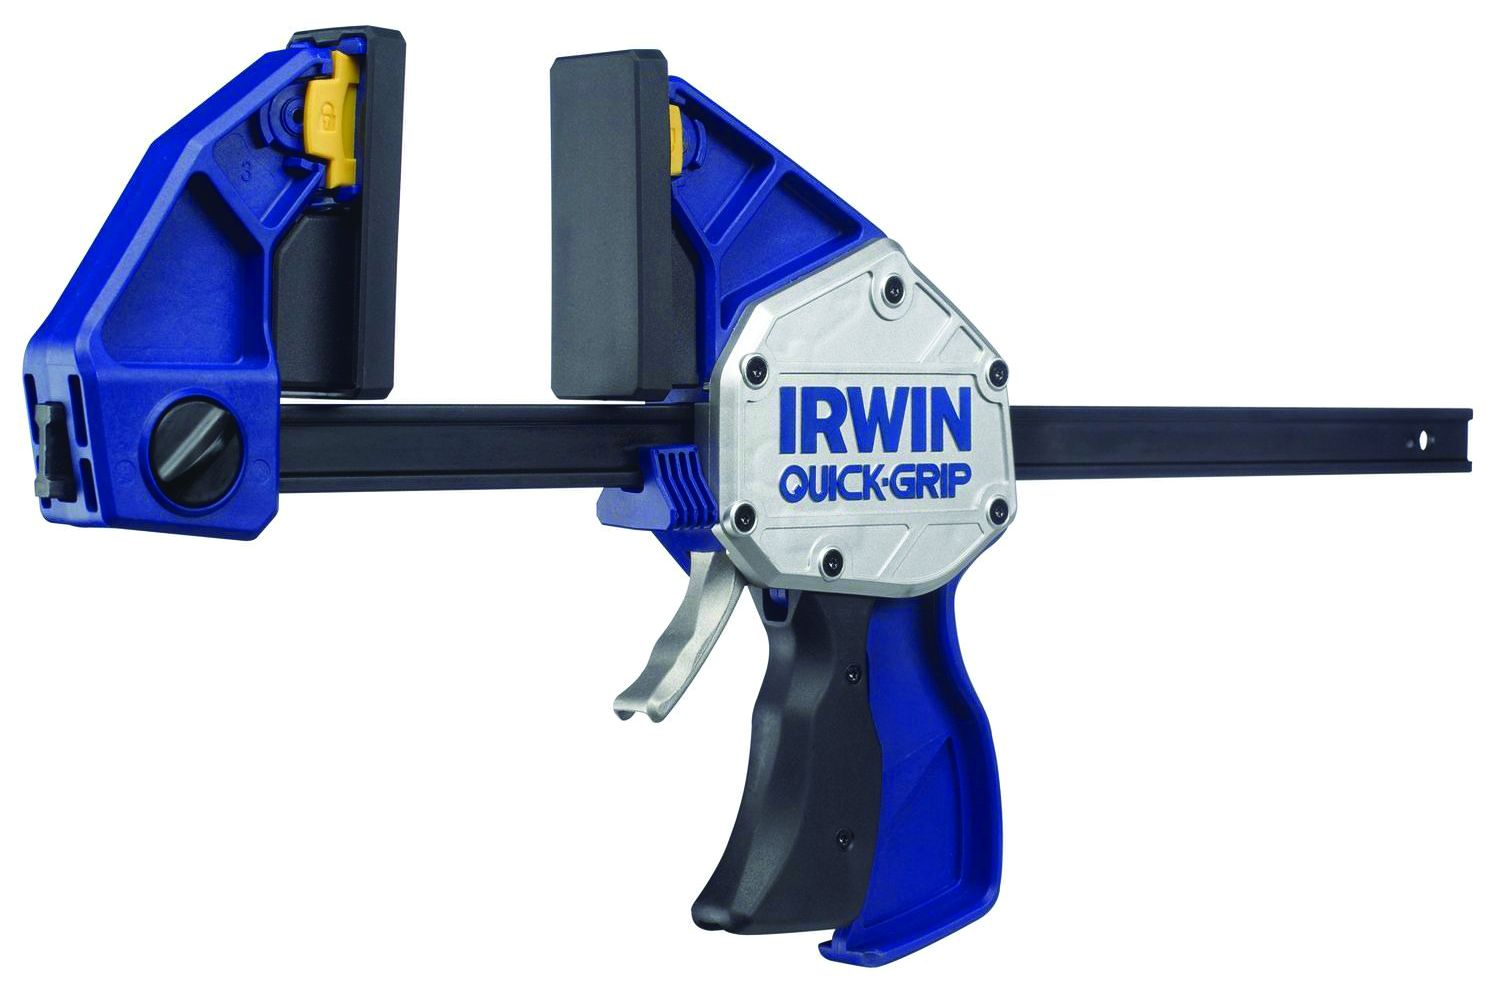 Irwin Tools 1964716 - "Quick-Grip XP600" Clamping Tool